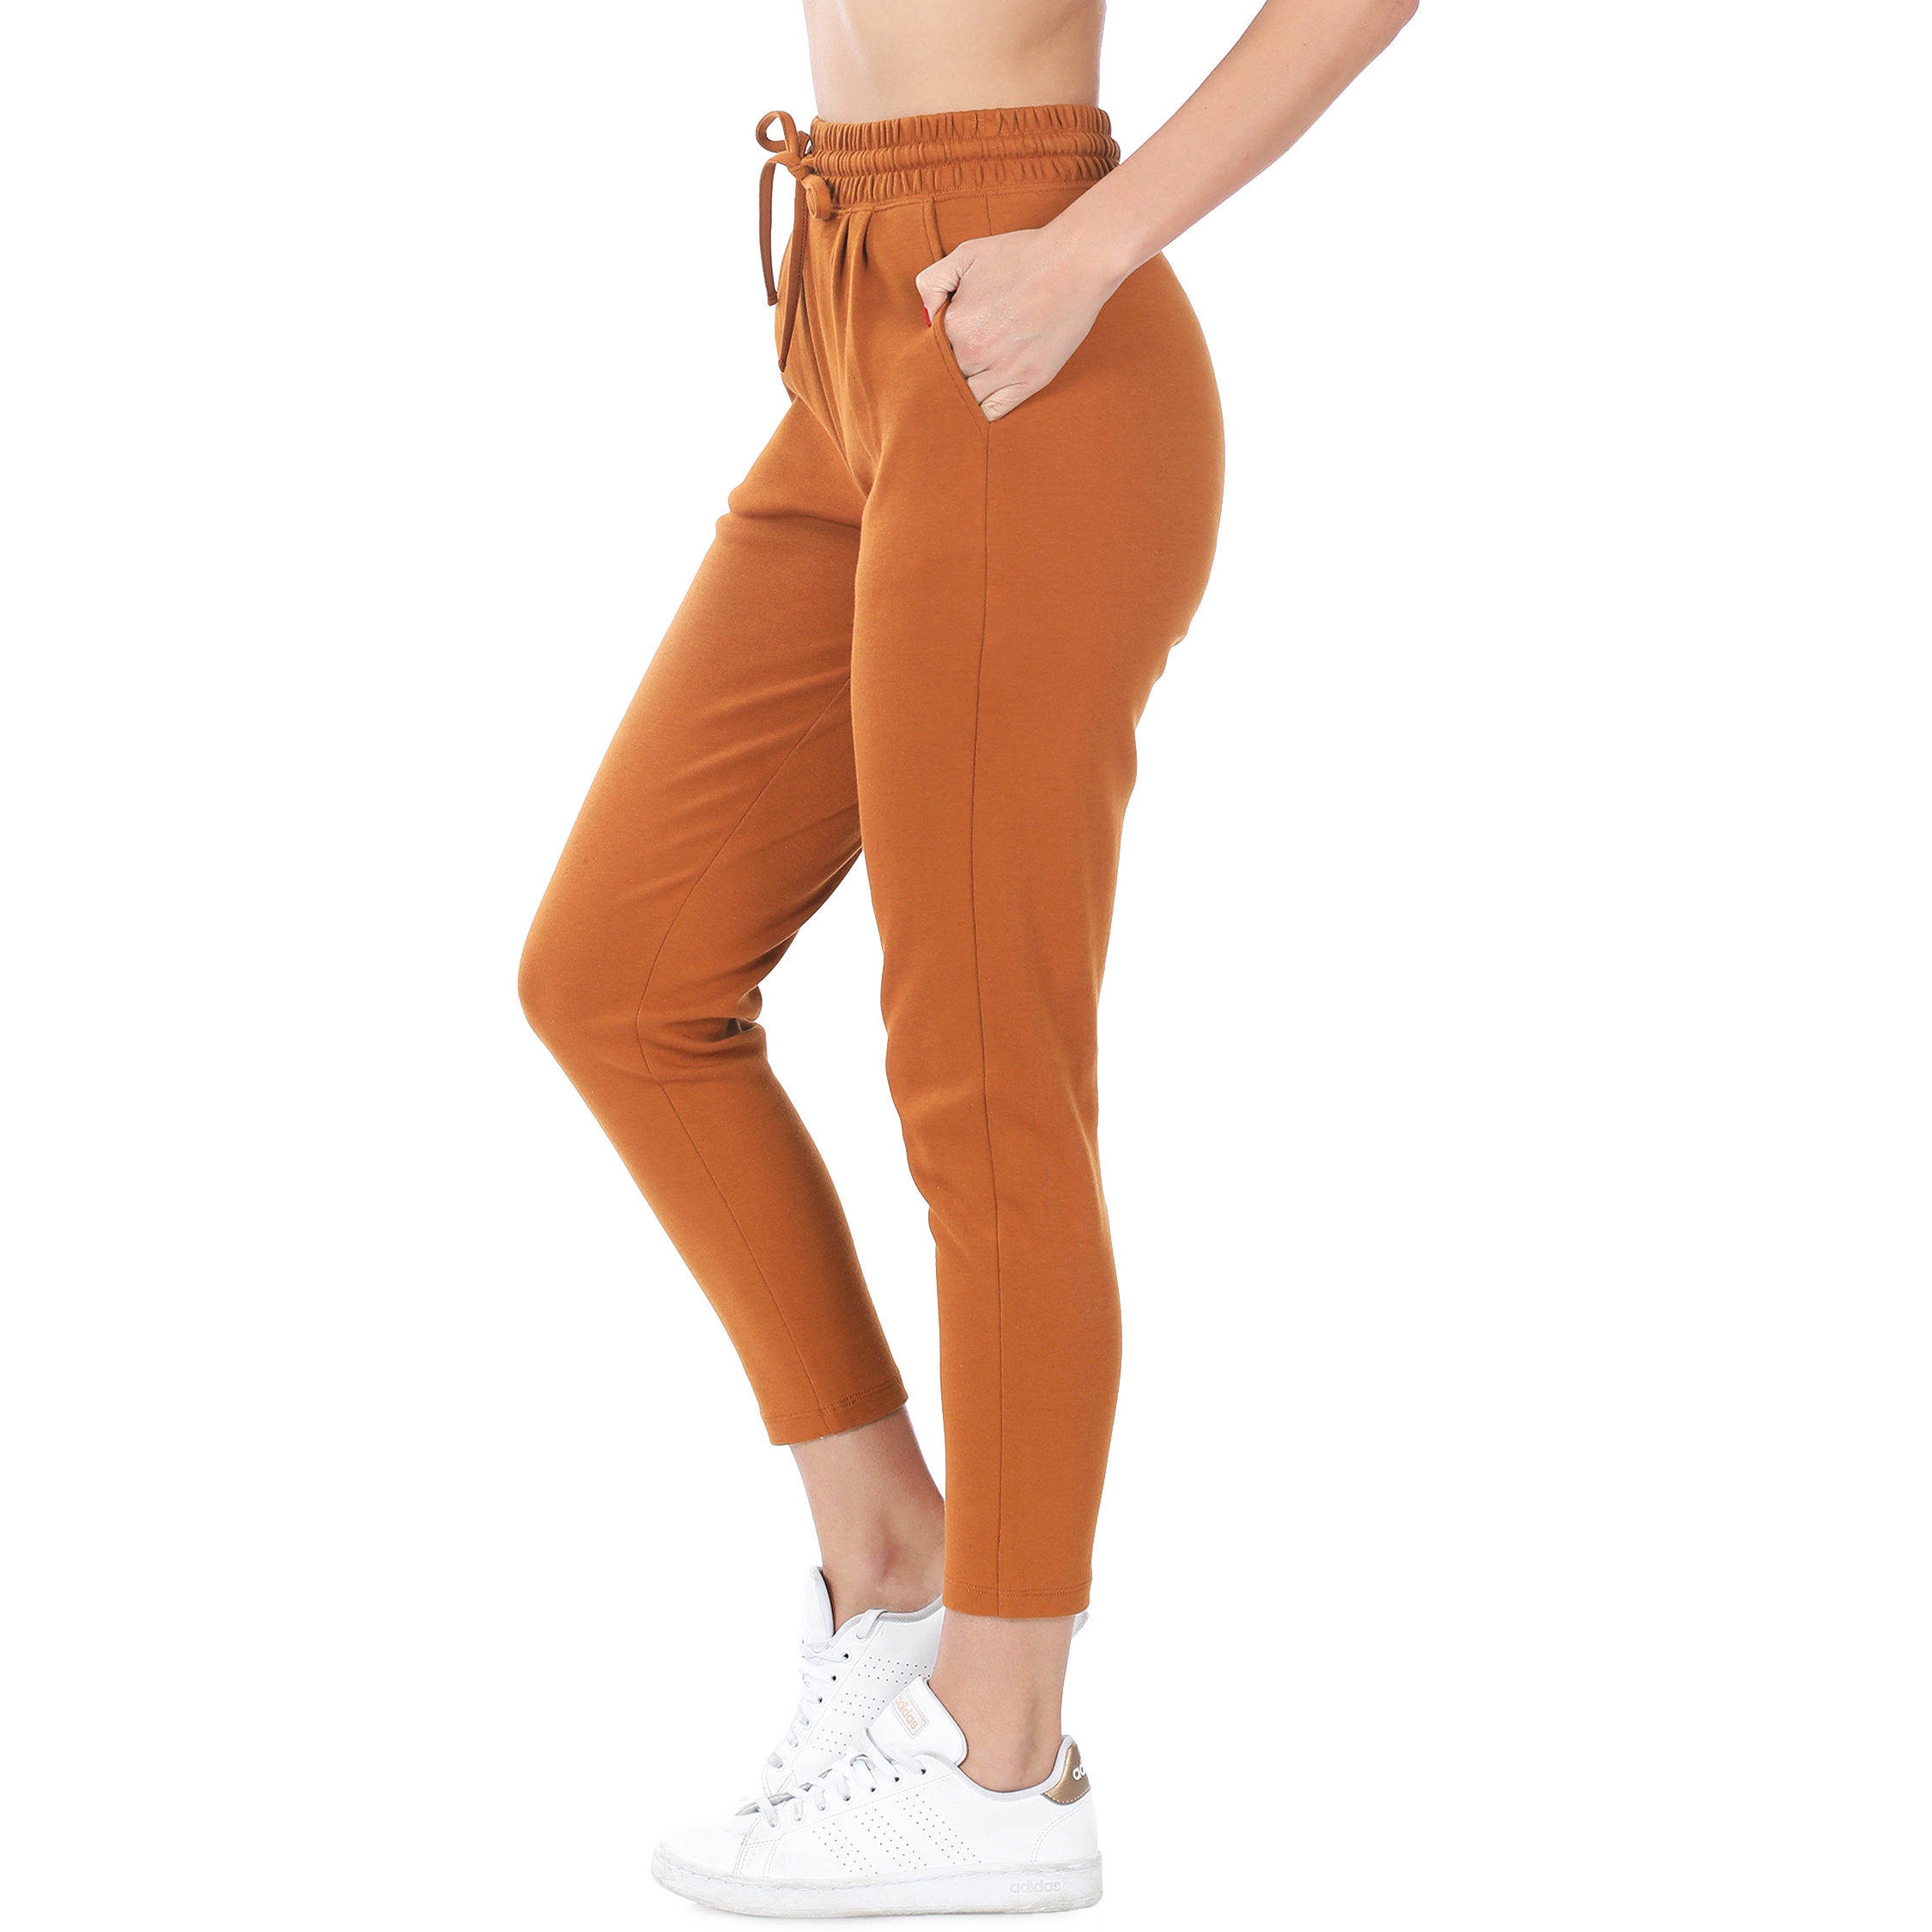 Women's Joggers Sweatpants Workout Pants with pockets,  Elastic Waistband with Draw String, Relaxed Fit